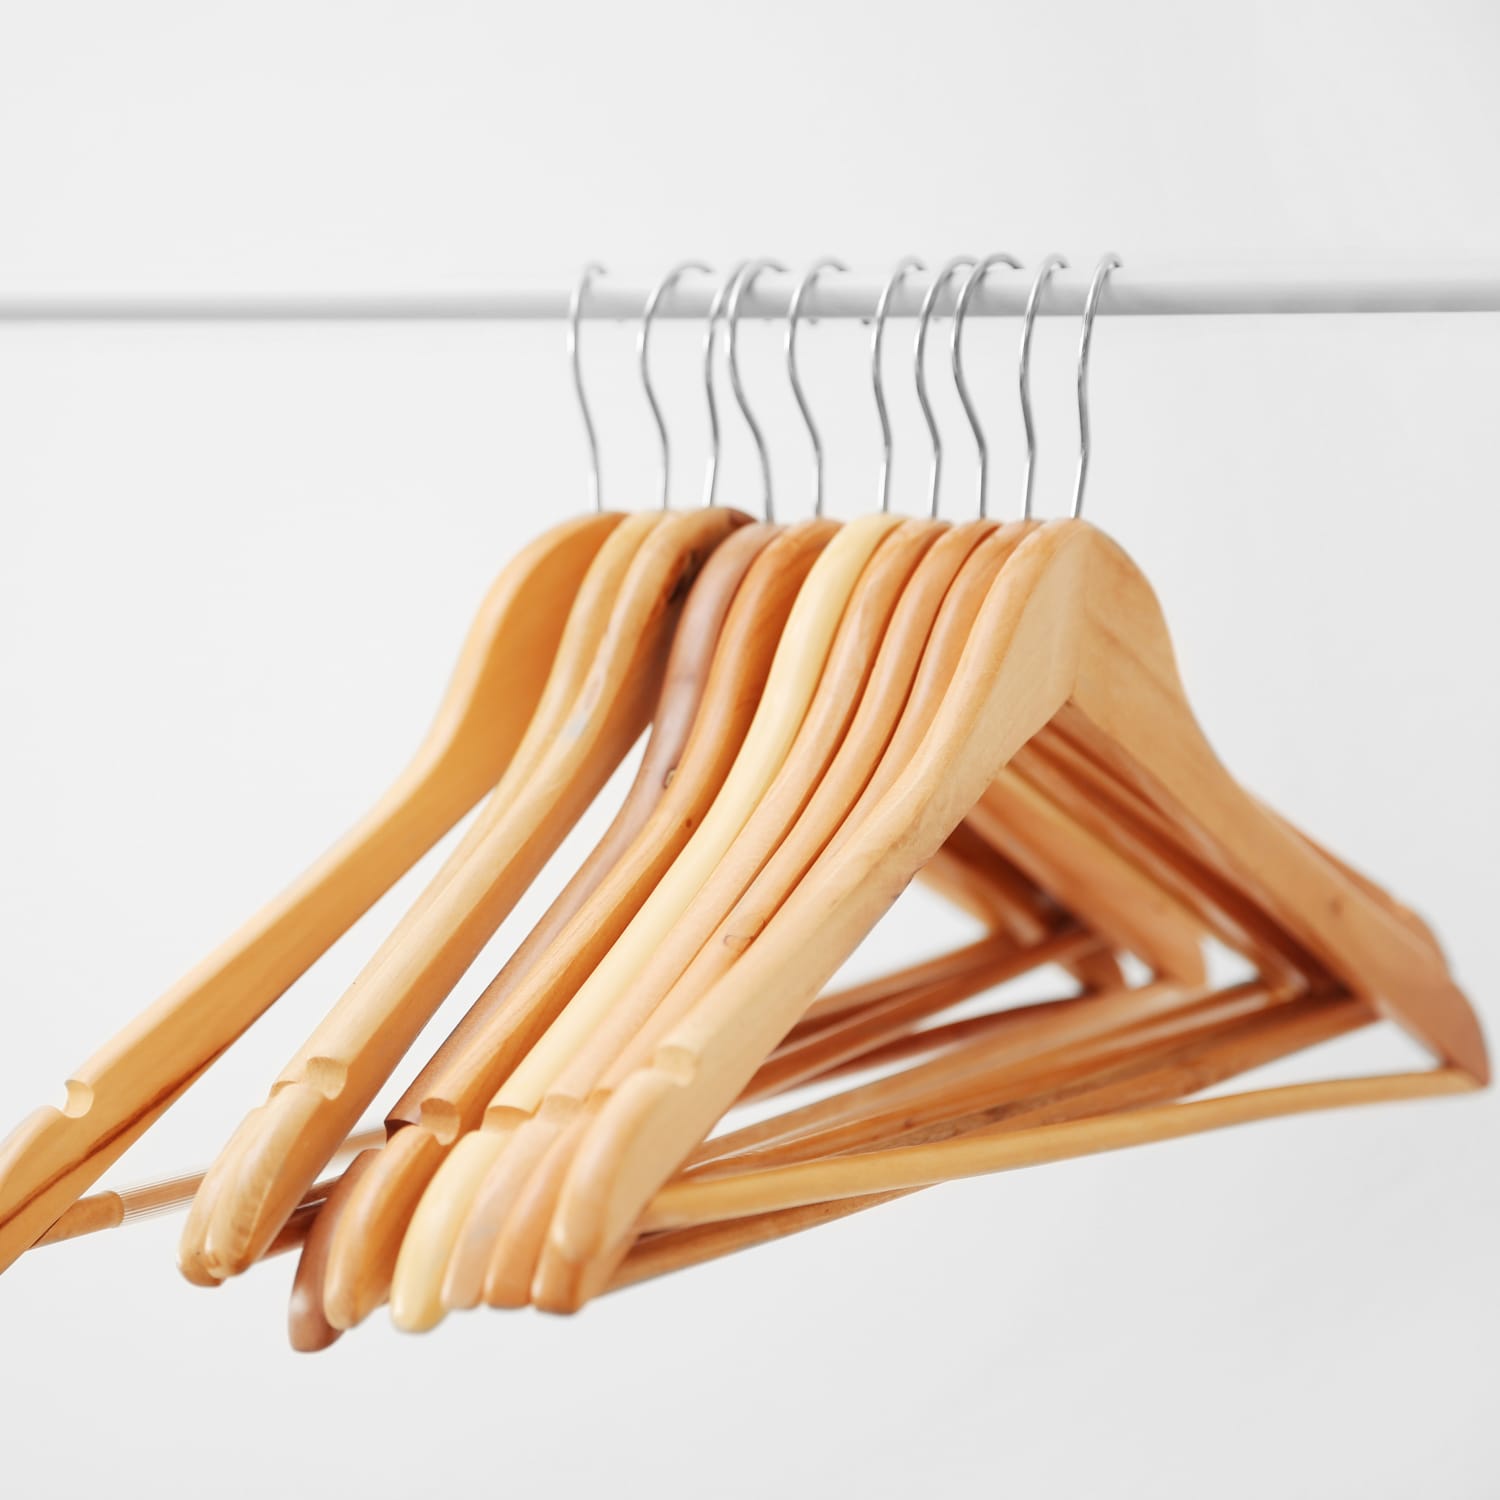 How To Reuse and Repurpose Hangers